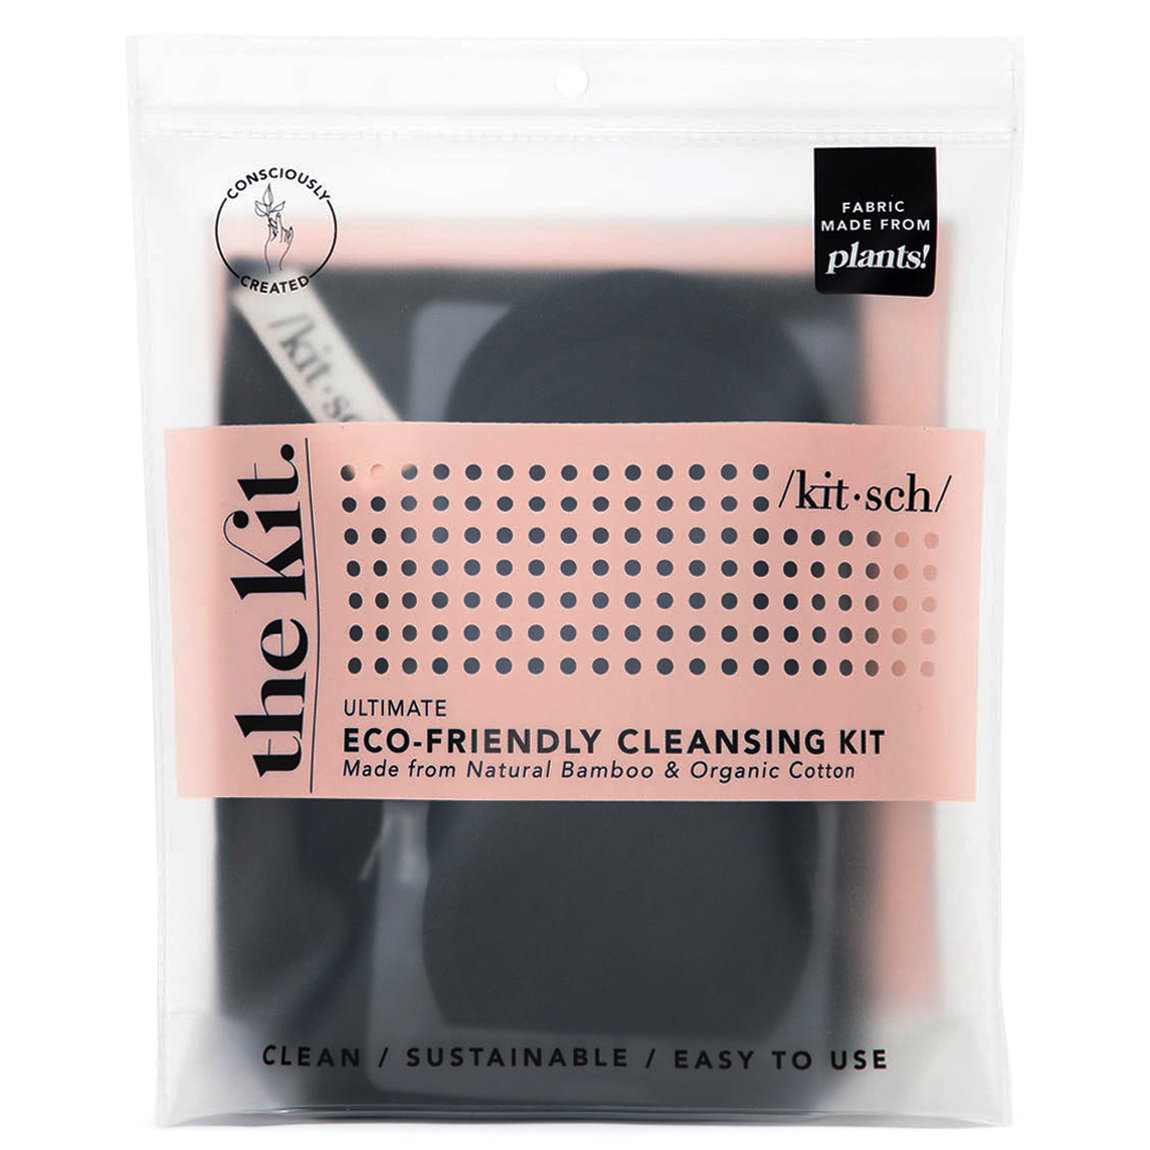 Kitsch Eco-Friendly Ultimate Cleansing Kit Black alternative view 1 - product swatch.